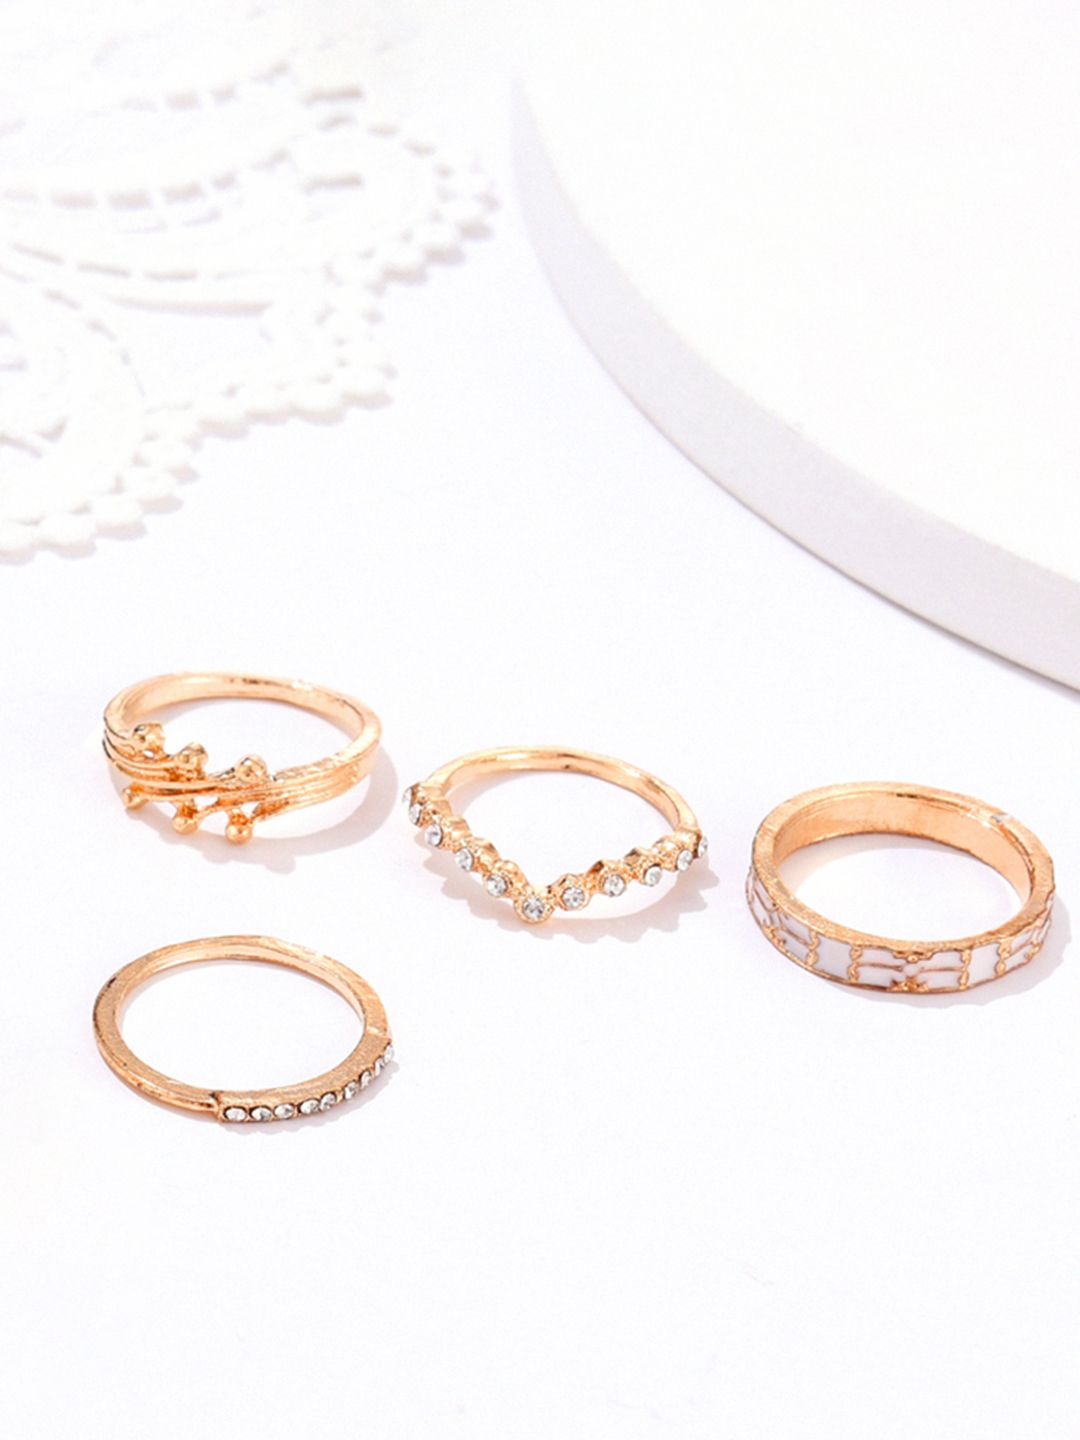 URBANIC Set of 4 Gold-Toned Stone Studded Finger Rings Price in India